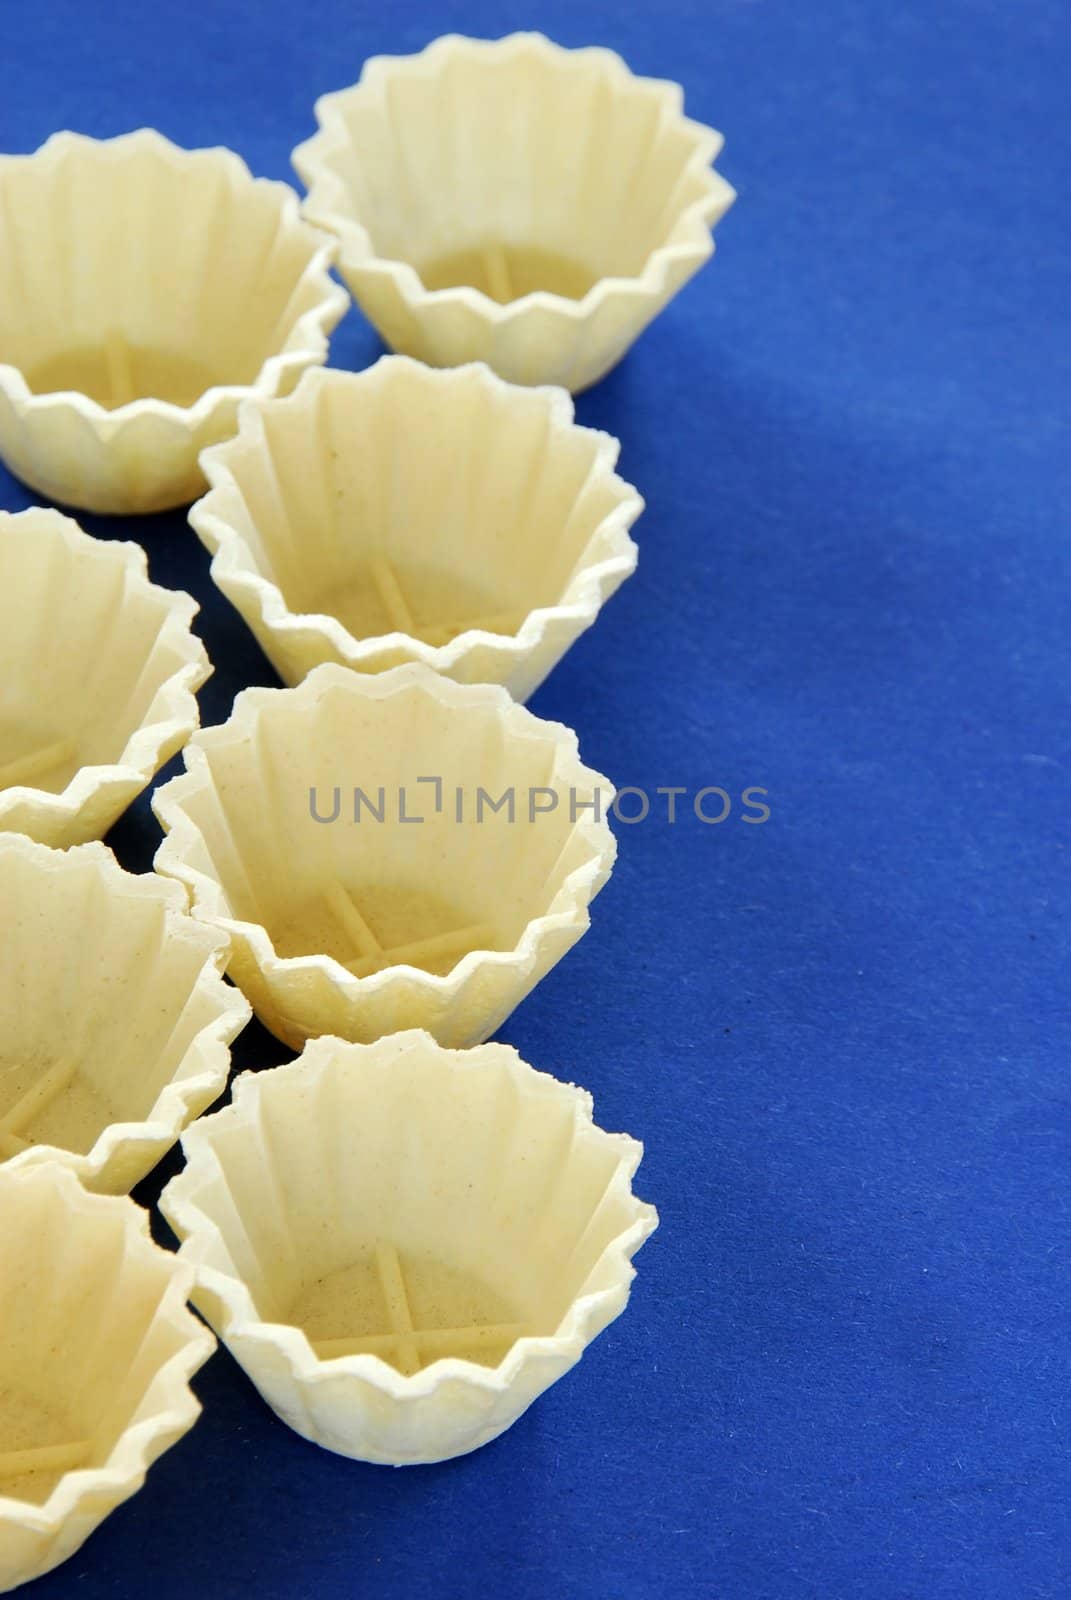 rows of empty small edible treats for decorative cookies over blue background